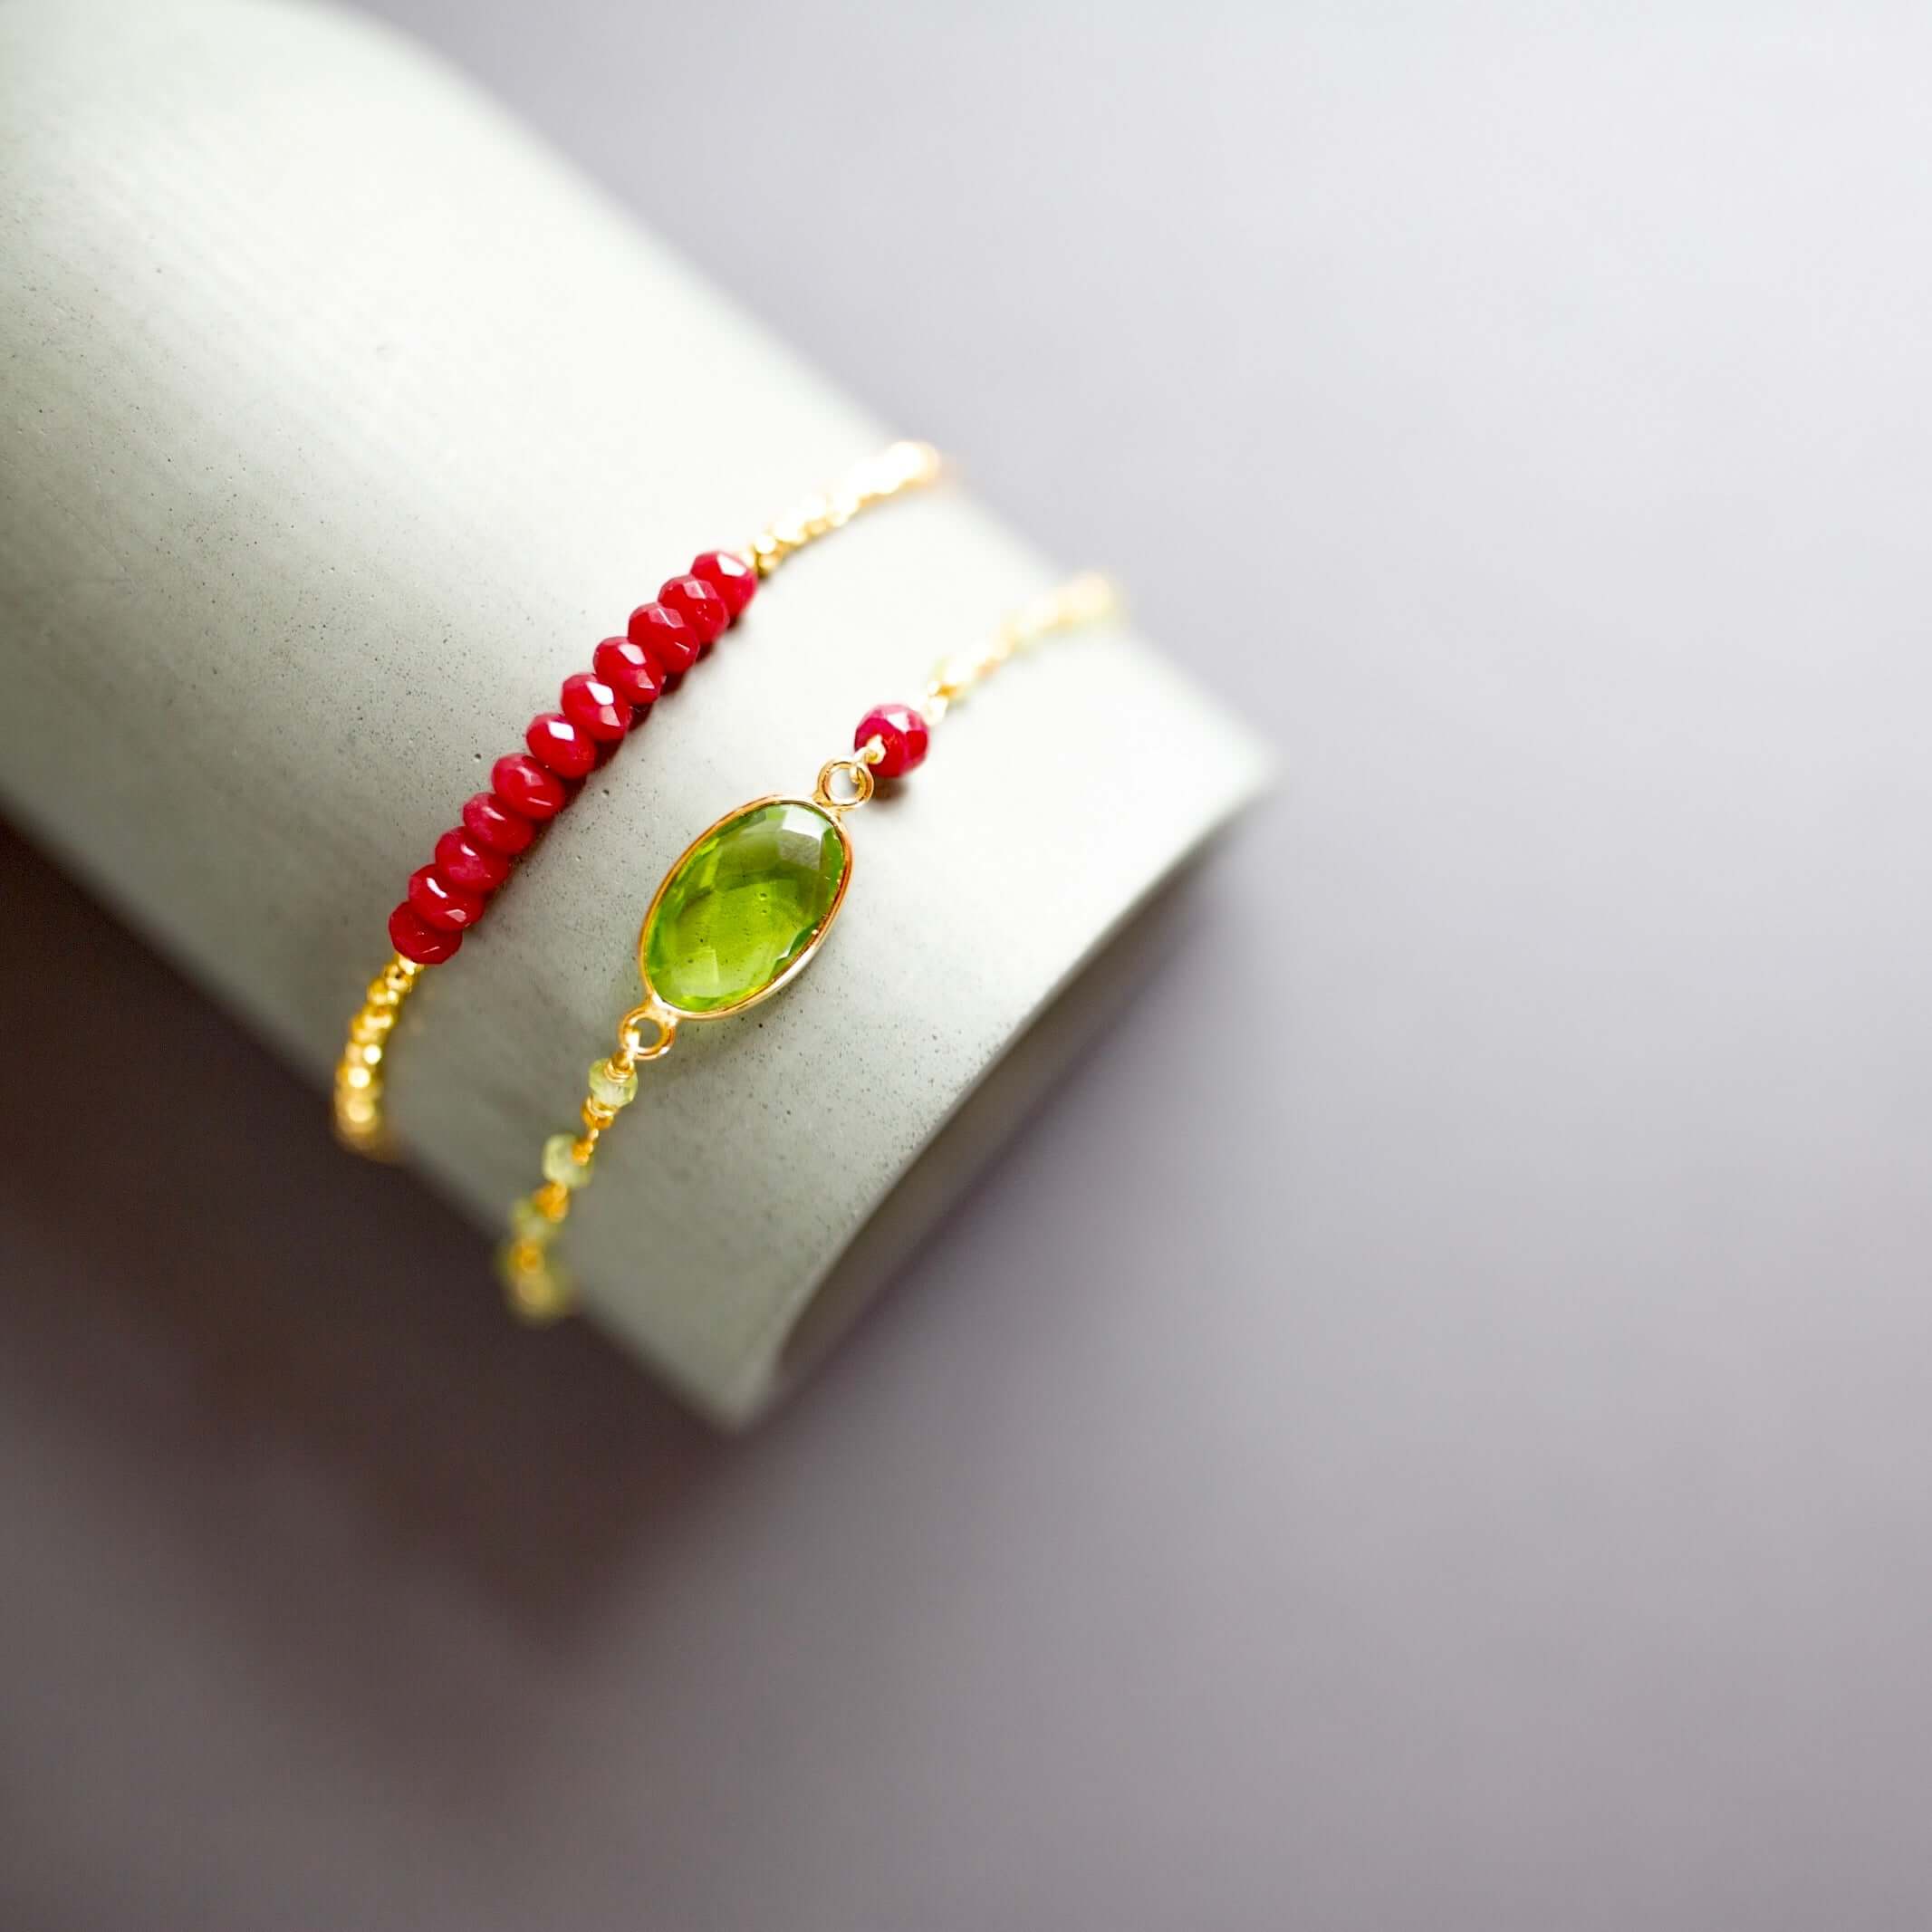 Gold-Plated  Bracelet Adorned with Authentic Peridot Stones